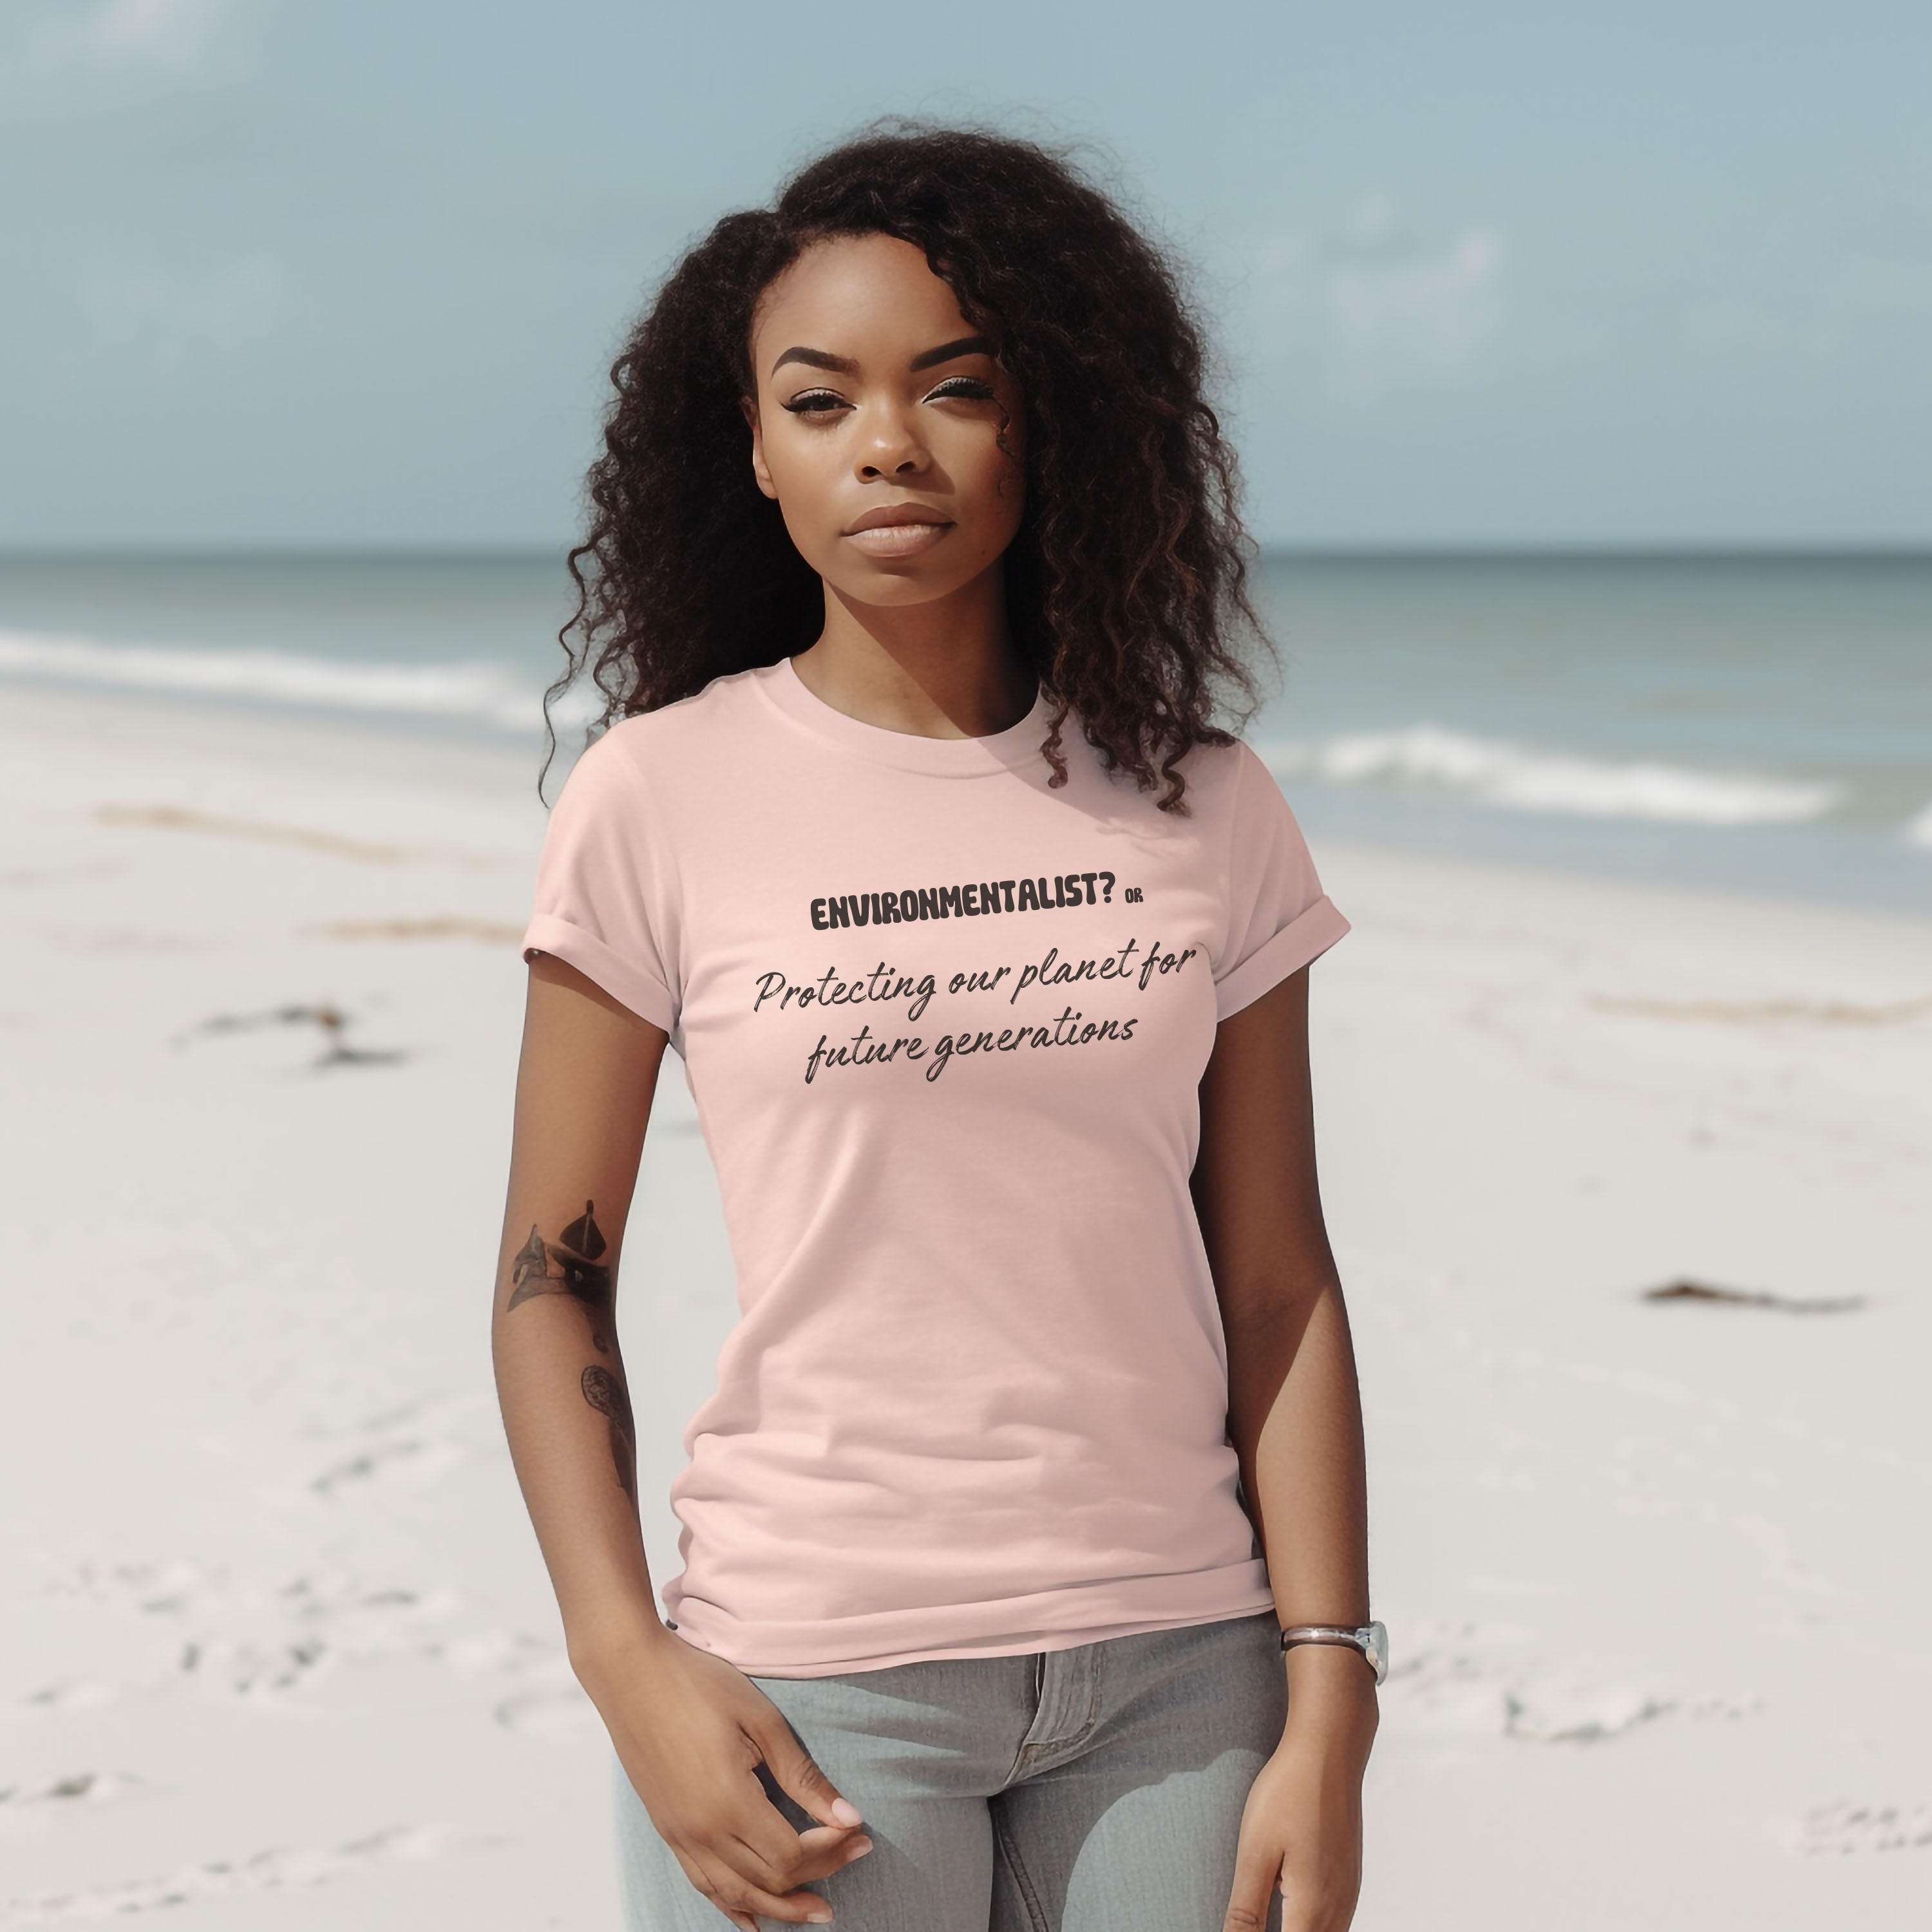 Environmentalist? or Protecting our planet for future generations T-shirt.